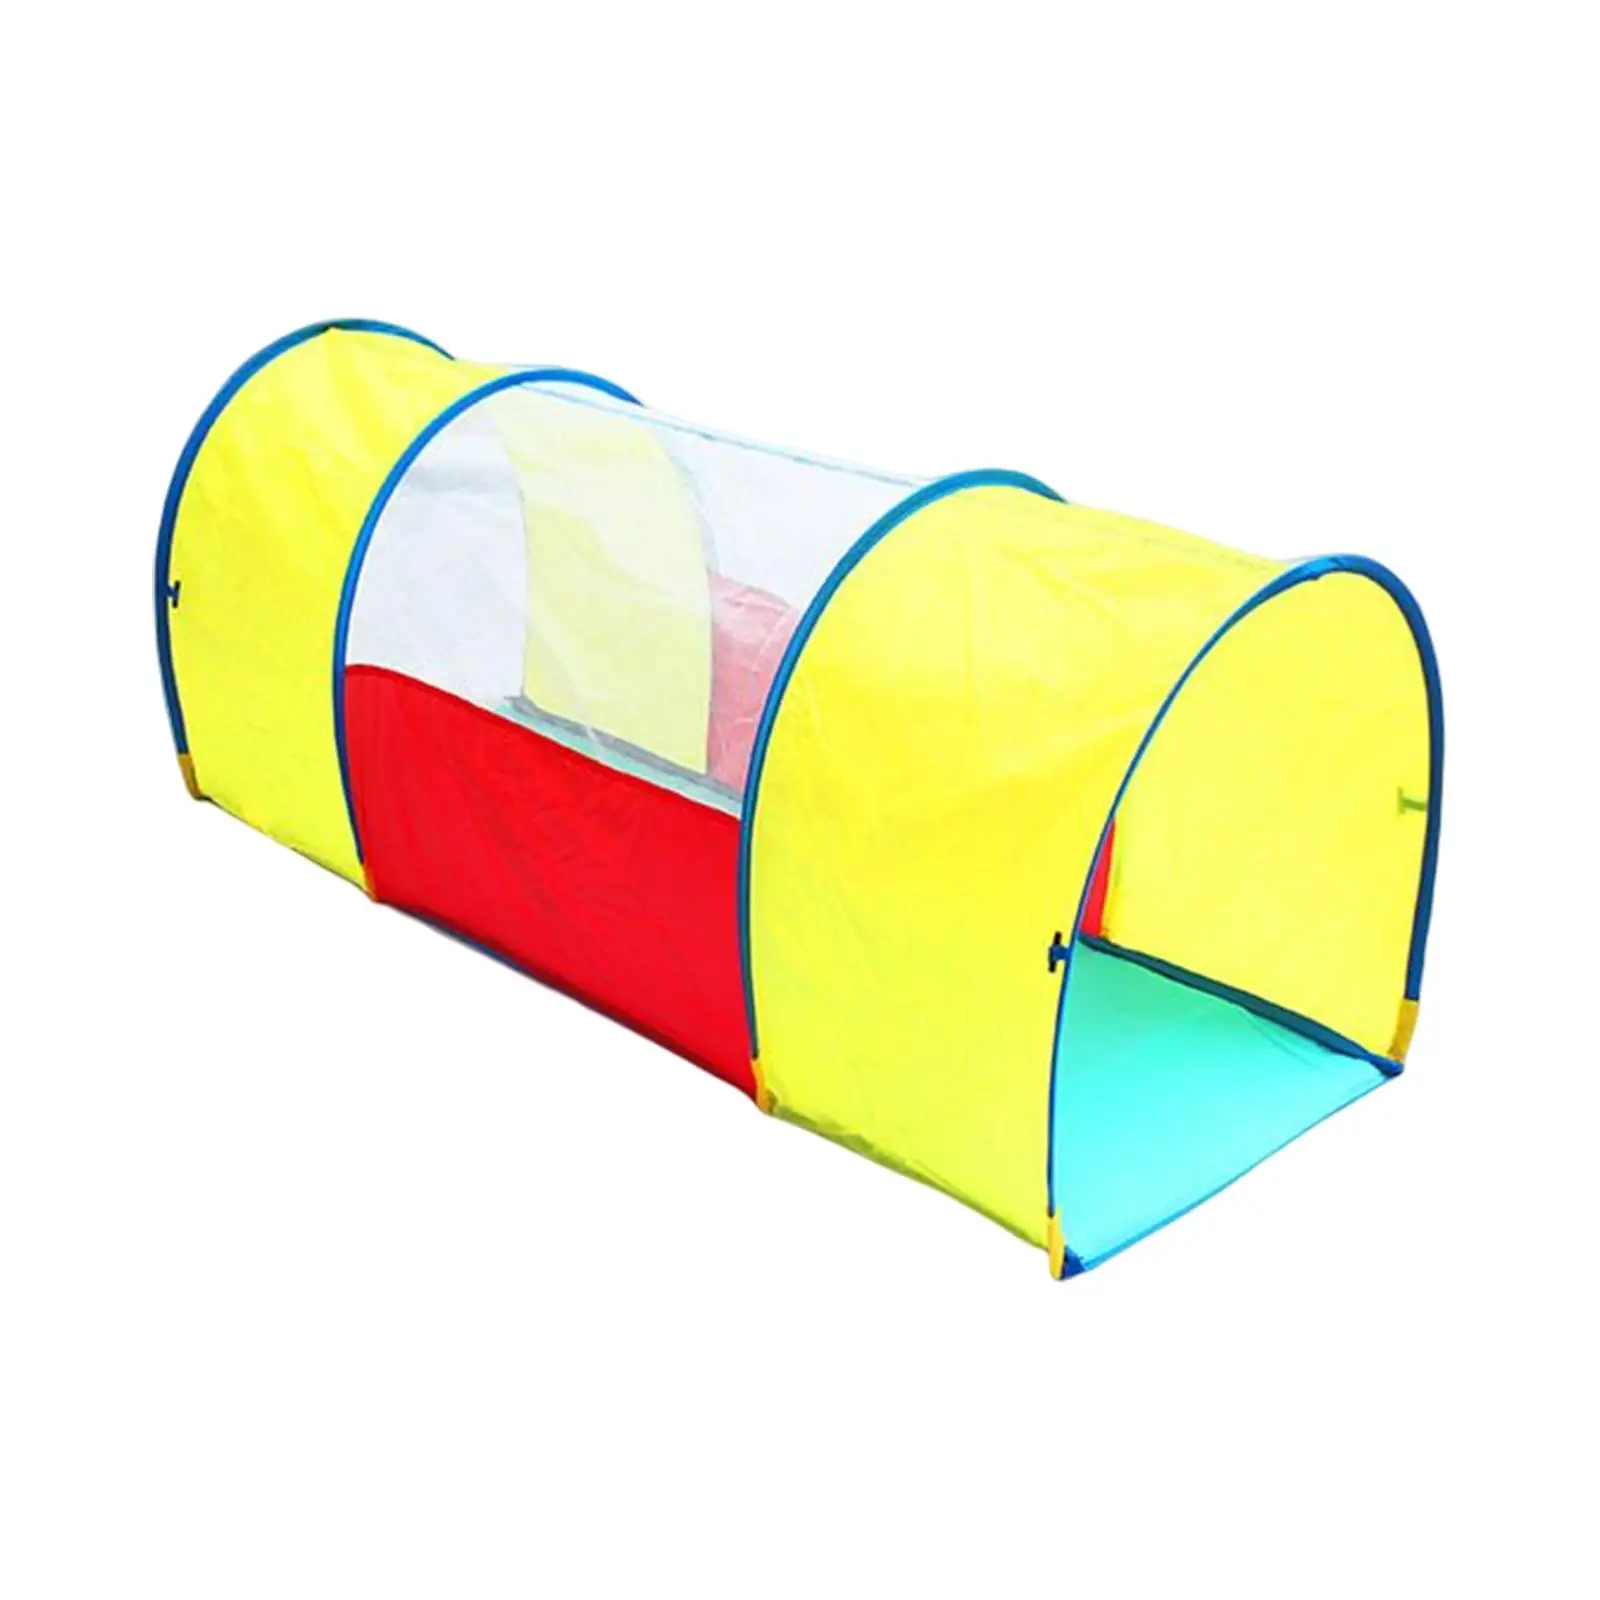 Breathable Kids Play Tunnel Tent Indoor Outdoor Game for Children Girls Boys